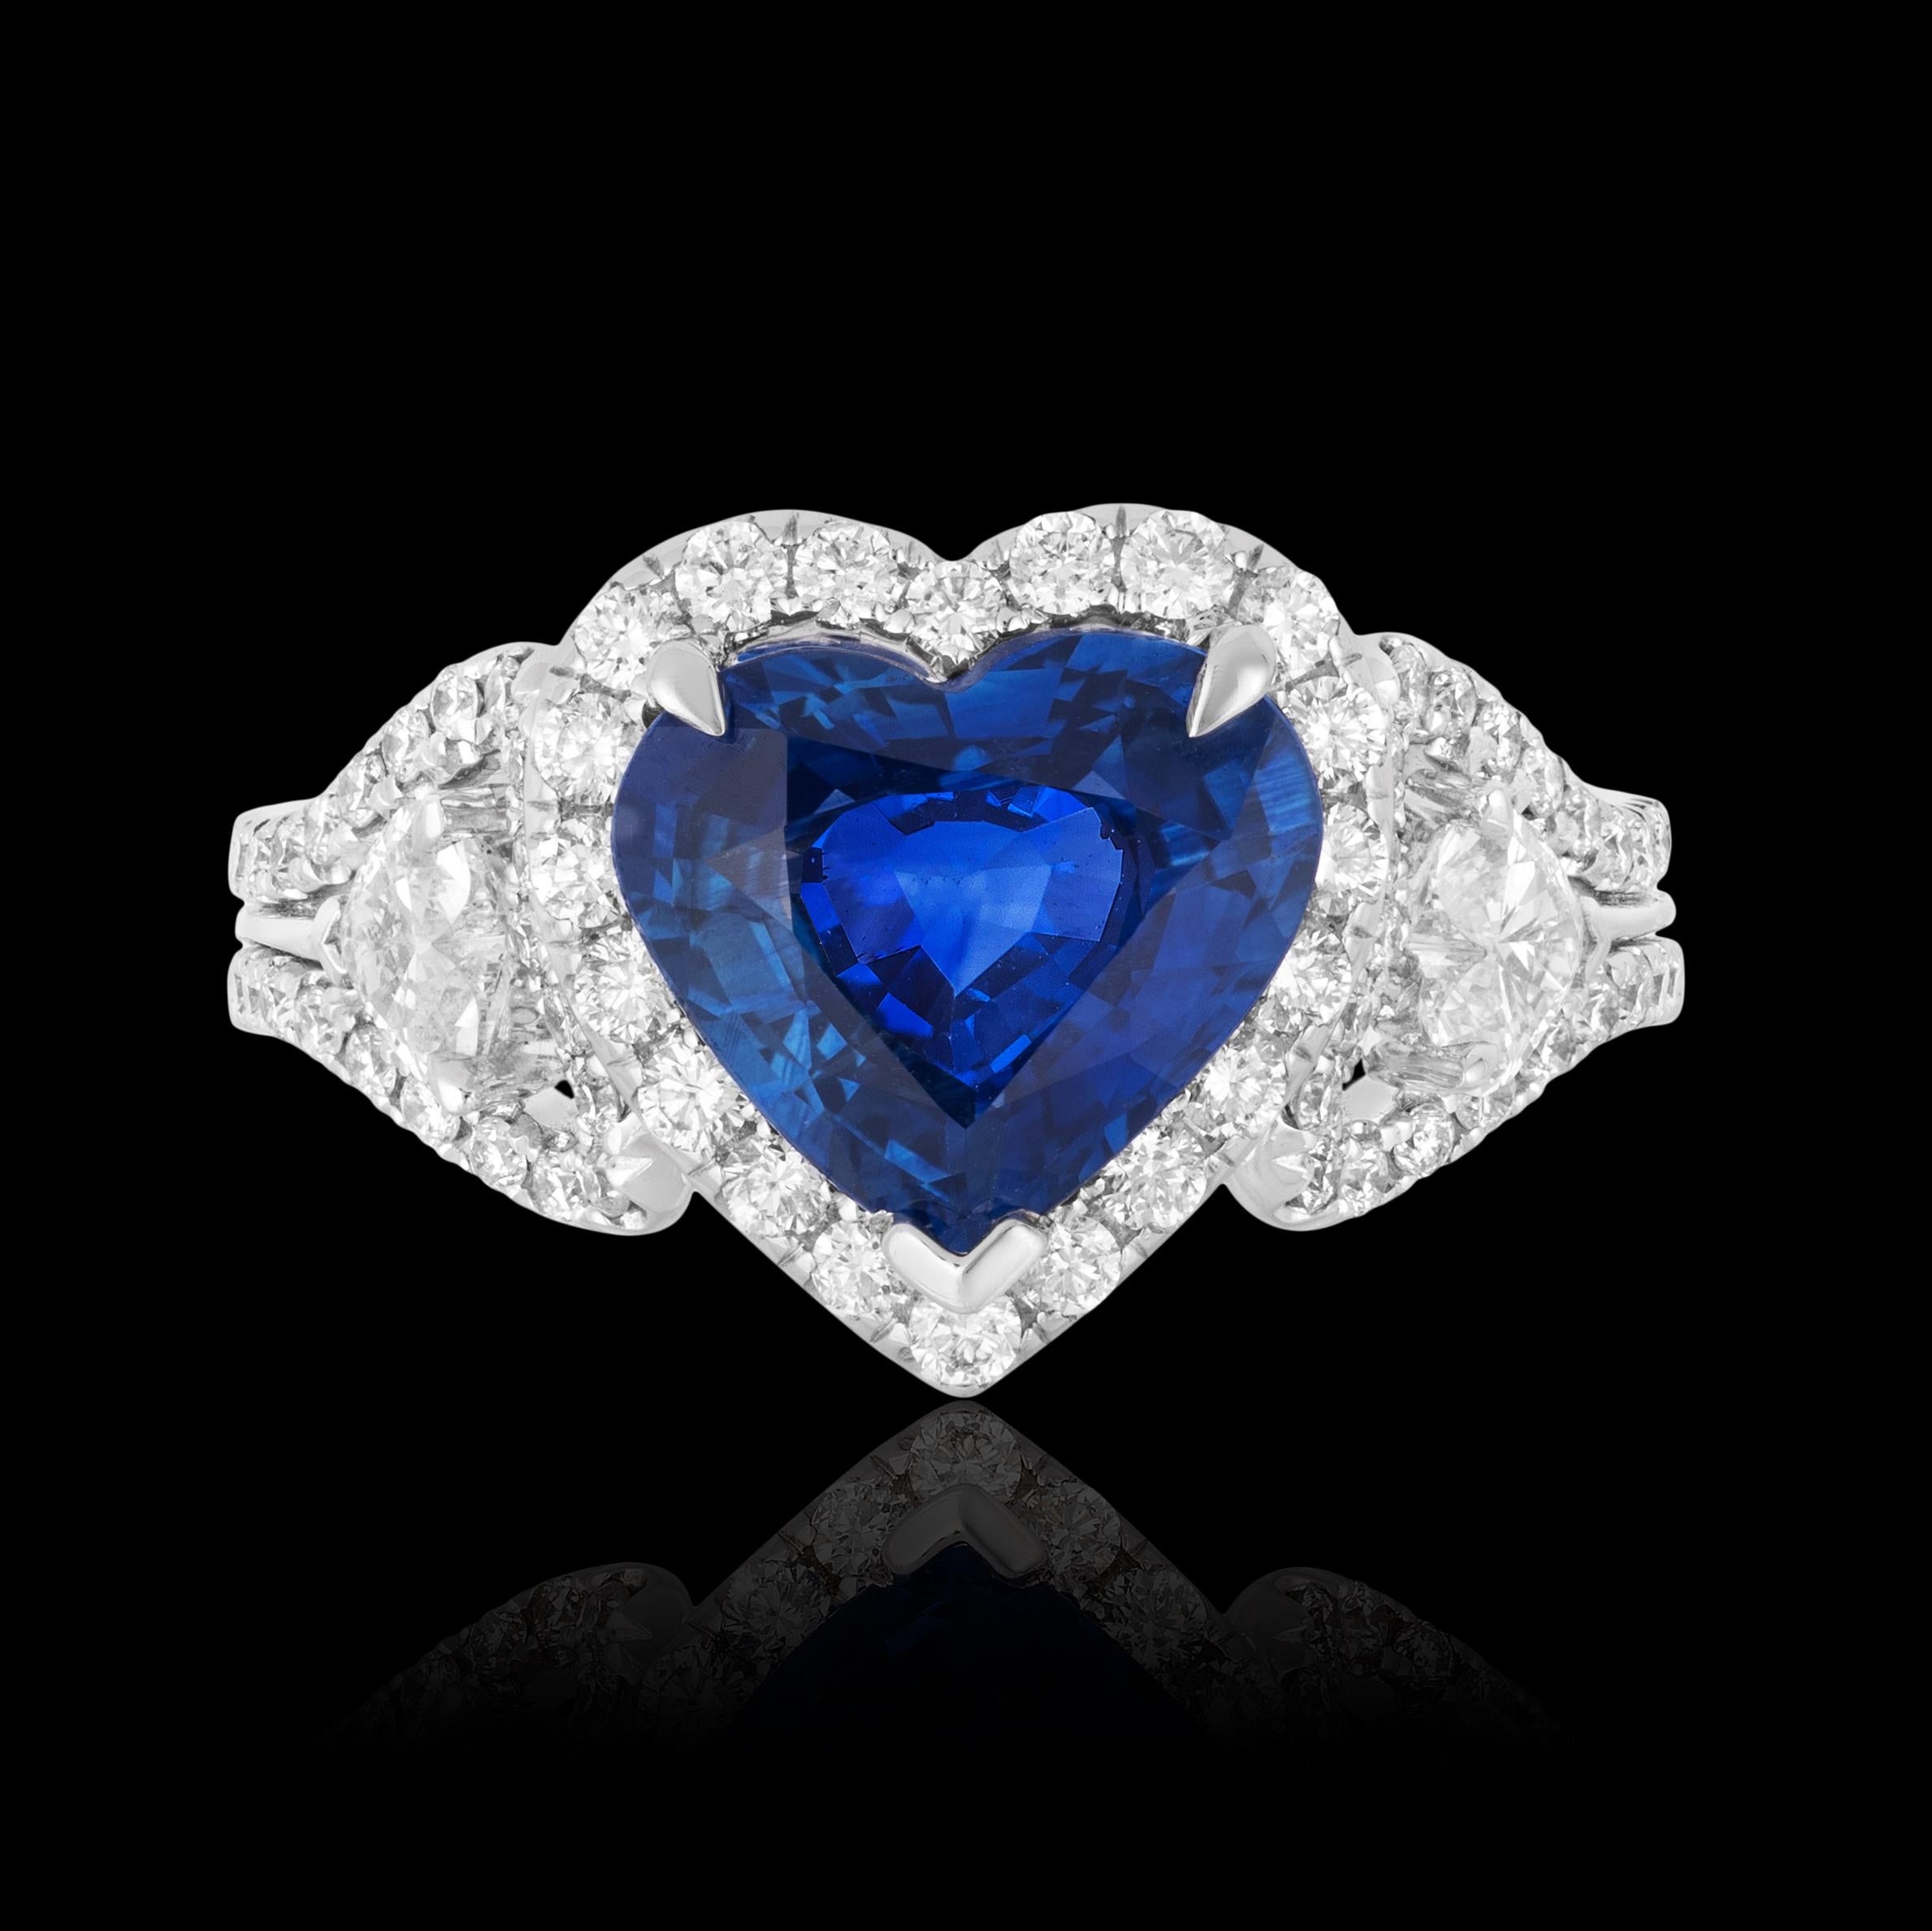 Andreoli CDC Certified 2.60 Carat Ceylon Blue Sapphire Diamond Heart Shape Ring

Features:

1.00 carat total weight of numerous near colourless round brilliant cut diamonds and two heart shape side diamonds.
2.60 carat Cornflower blue sapphire heart